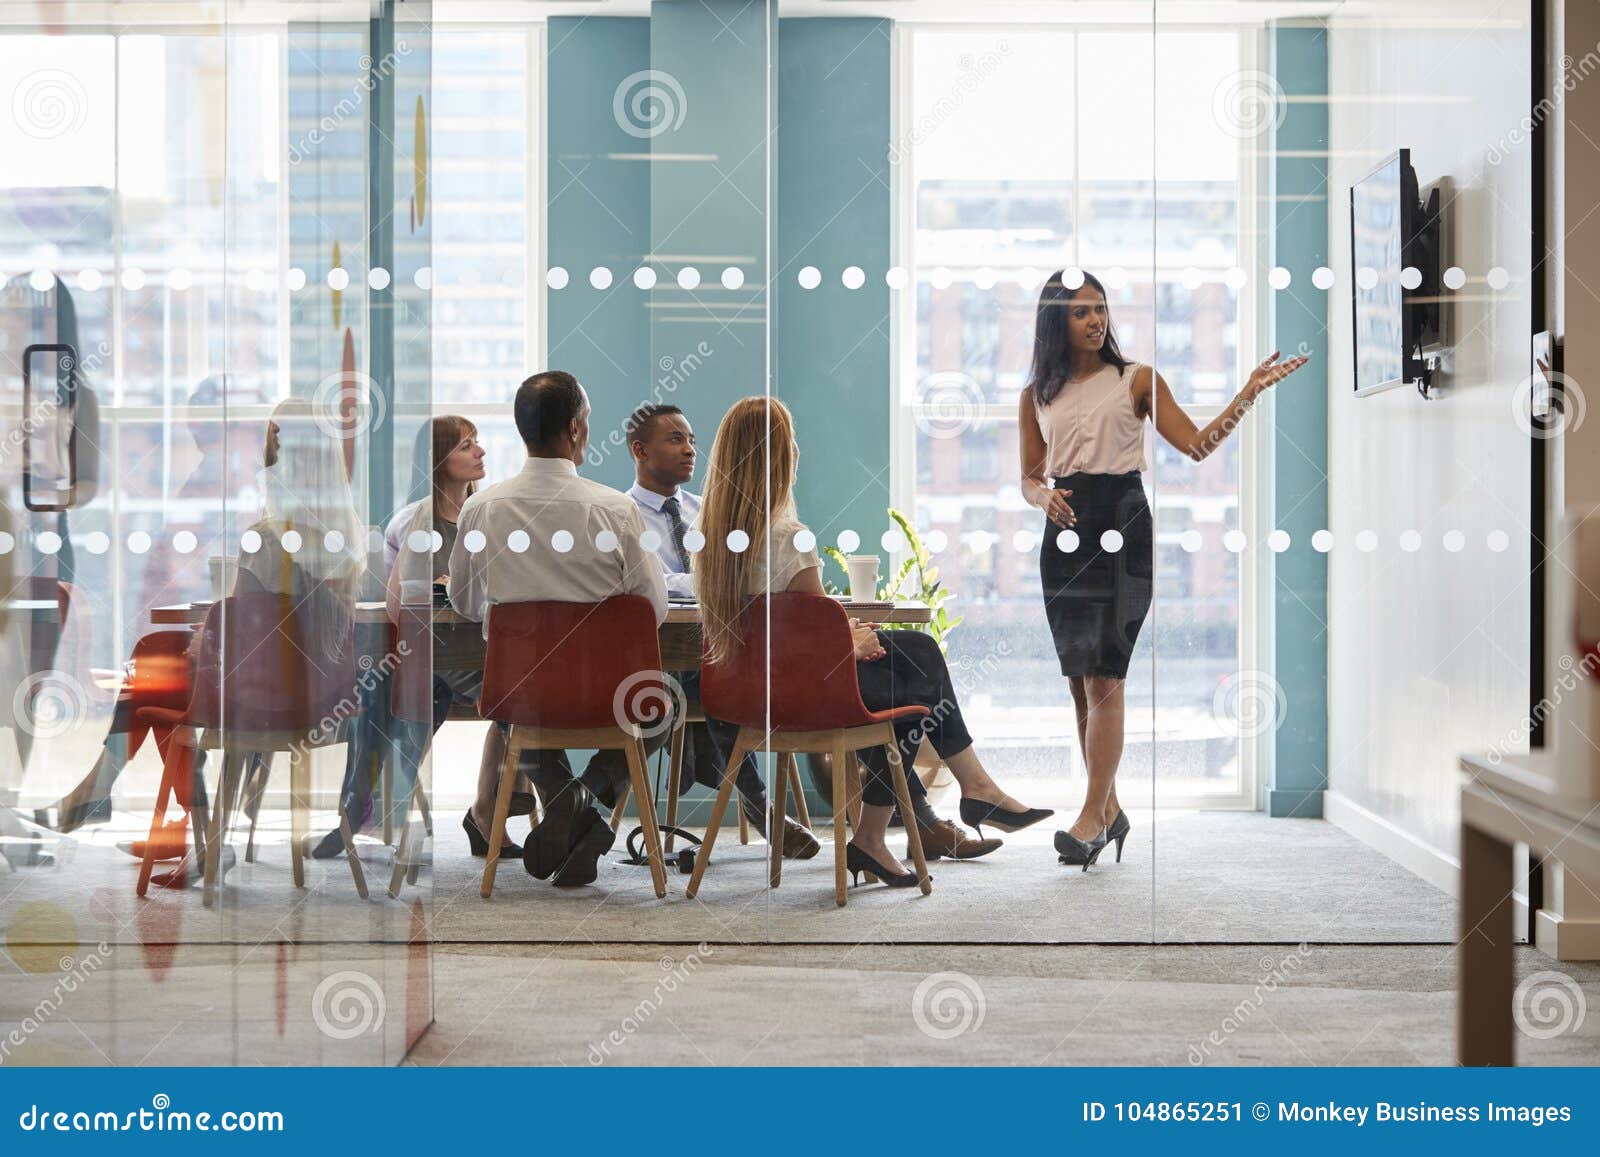 female boss shows presentation on screen at business meeting